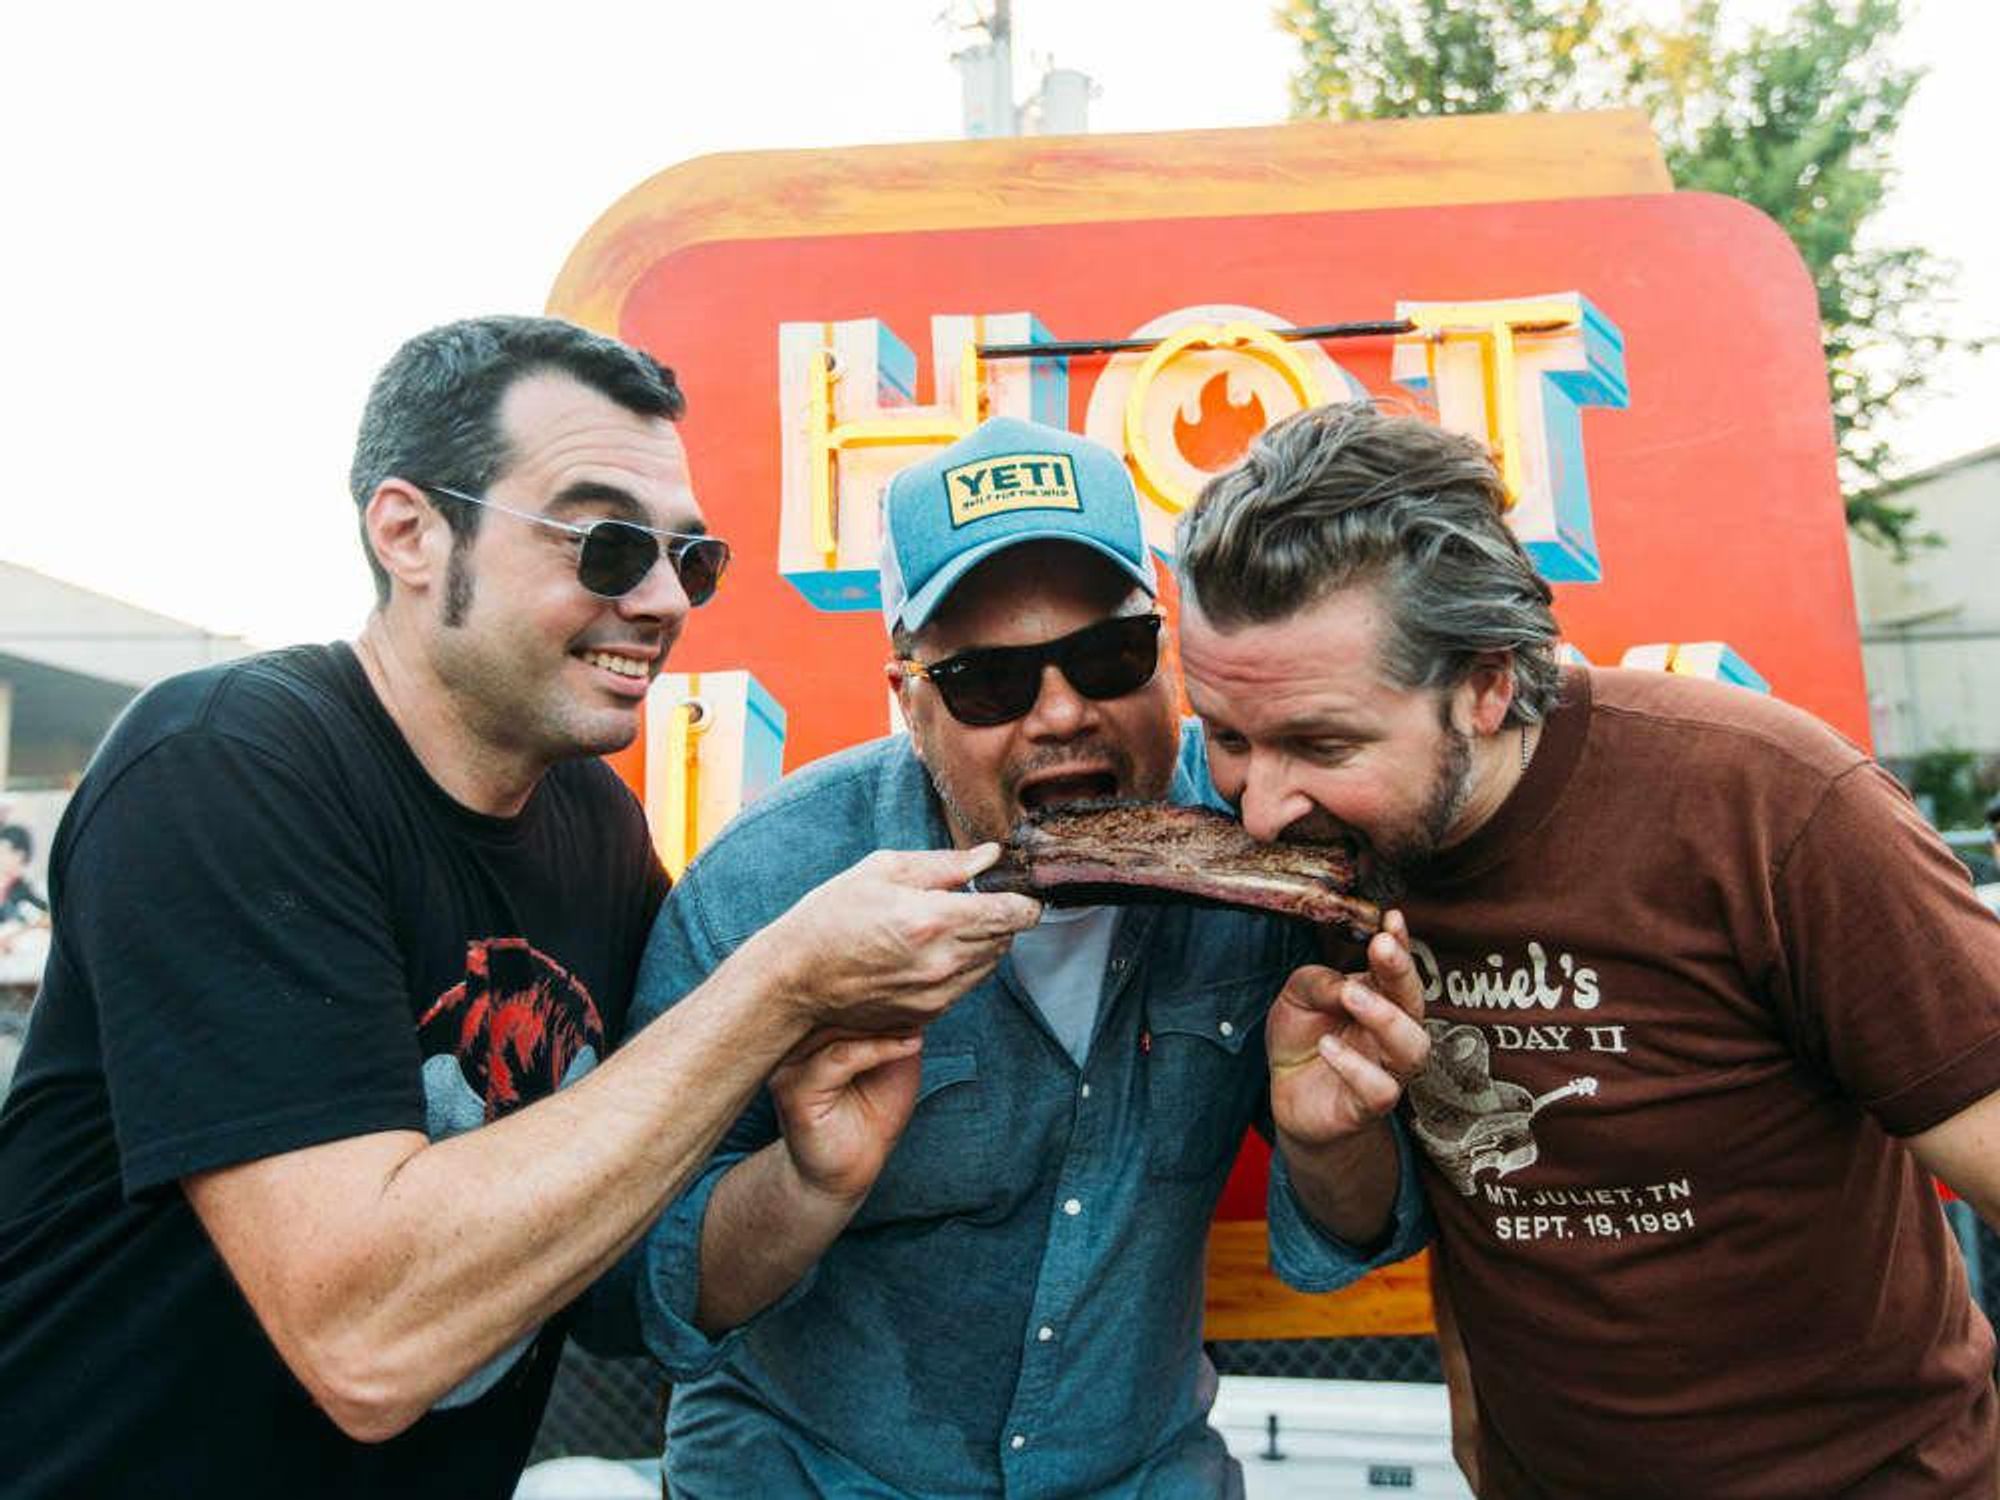 Aaron Franklin's Hot Luck Fest returns with smokin' chef lineup from Texas and beyond - CultureMap Austin